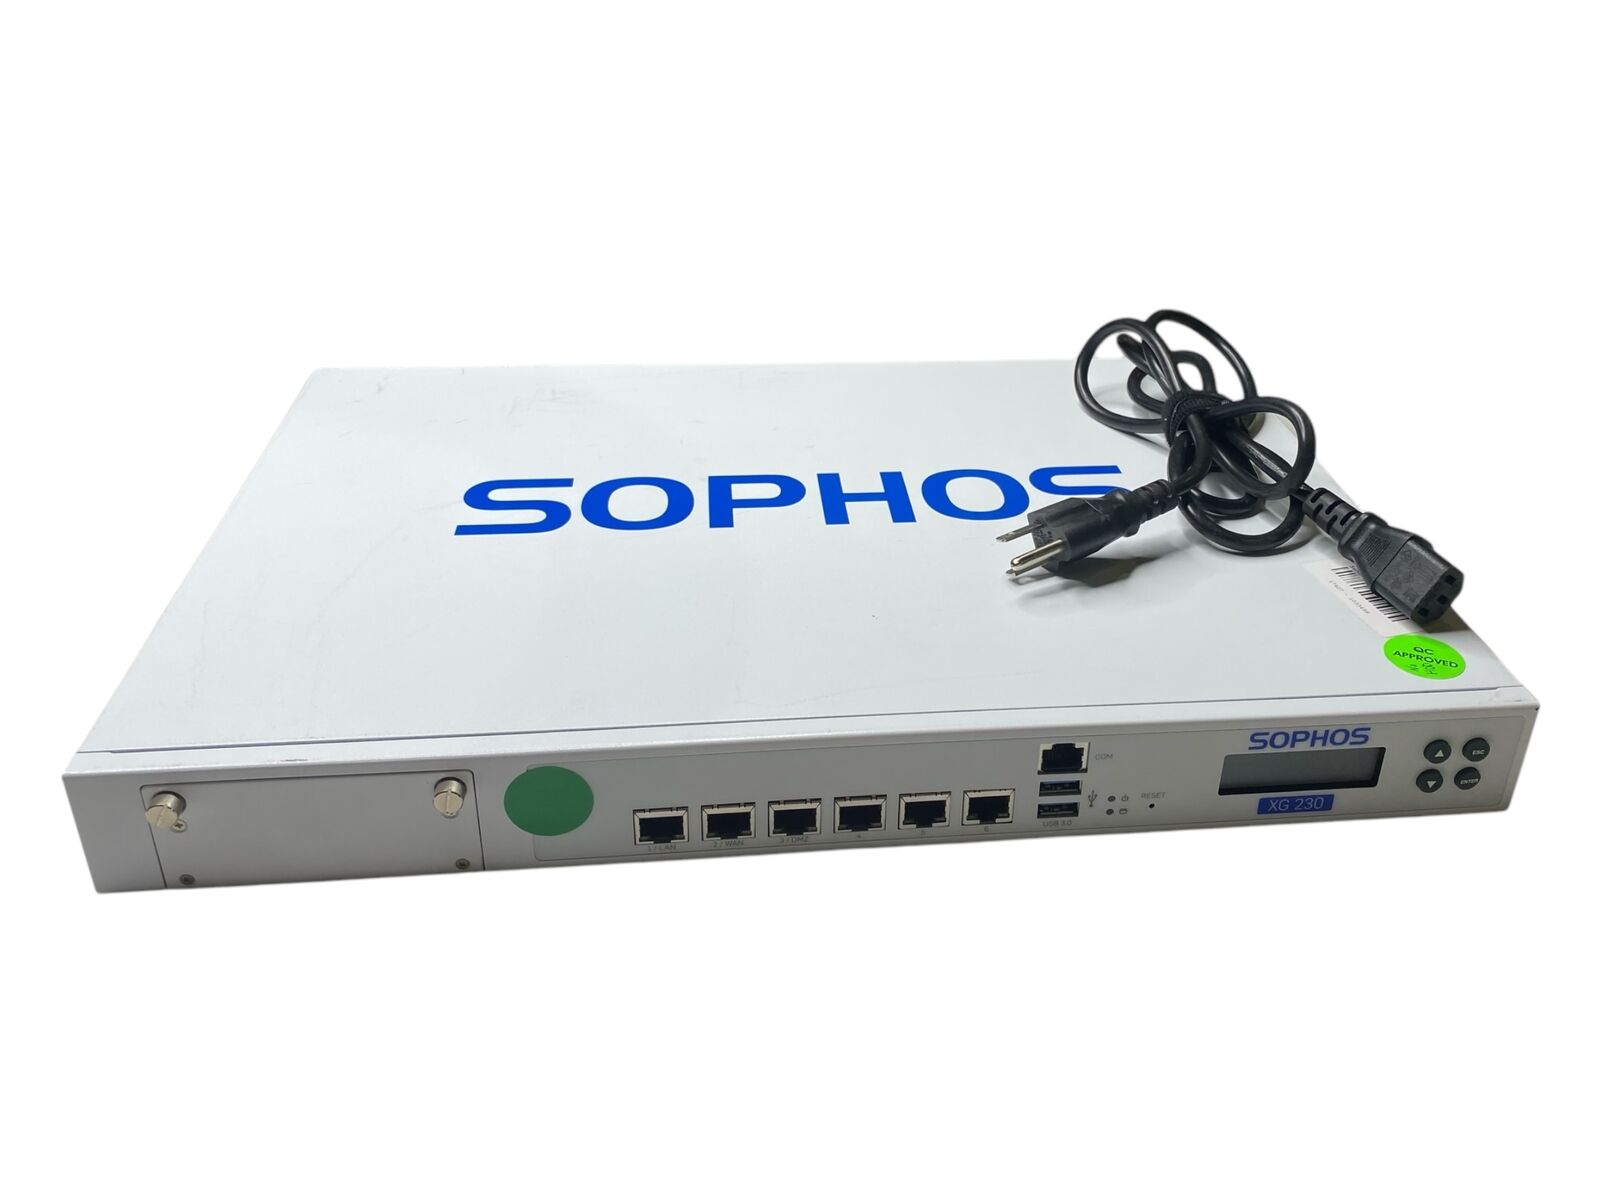 Sophos XG 230 rev 1 Firewall Security Appliance with AC Adapter